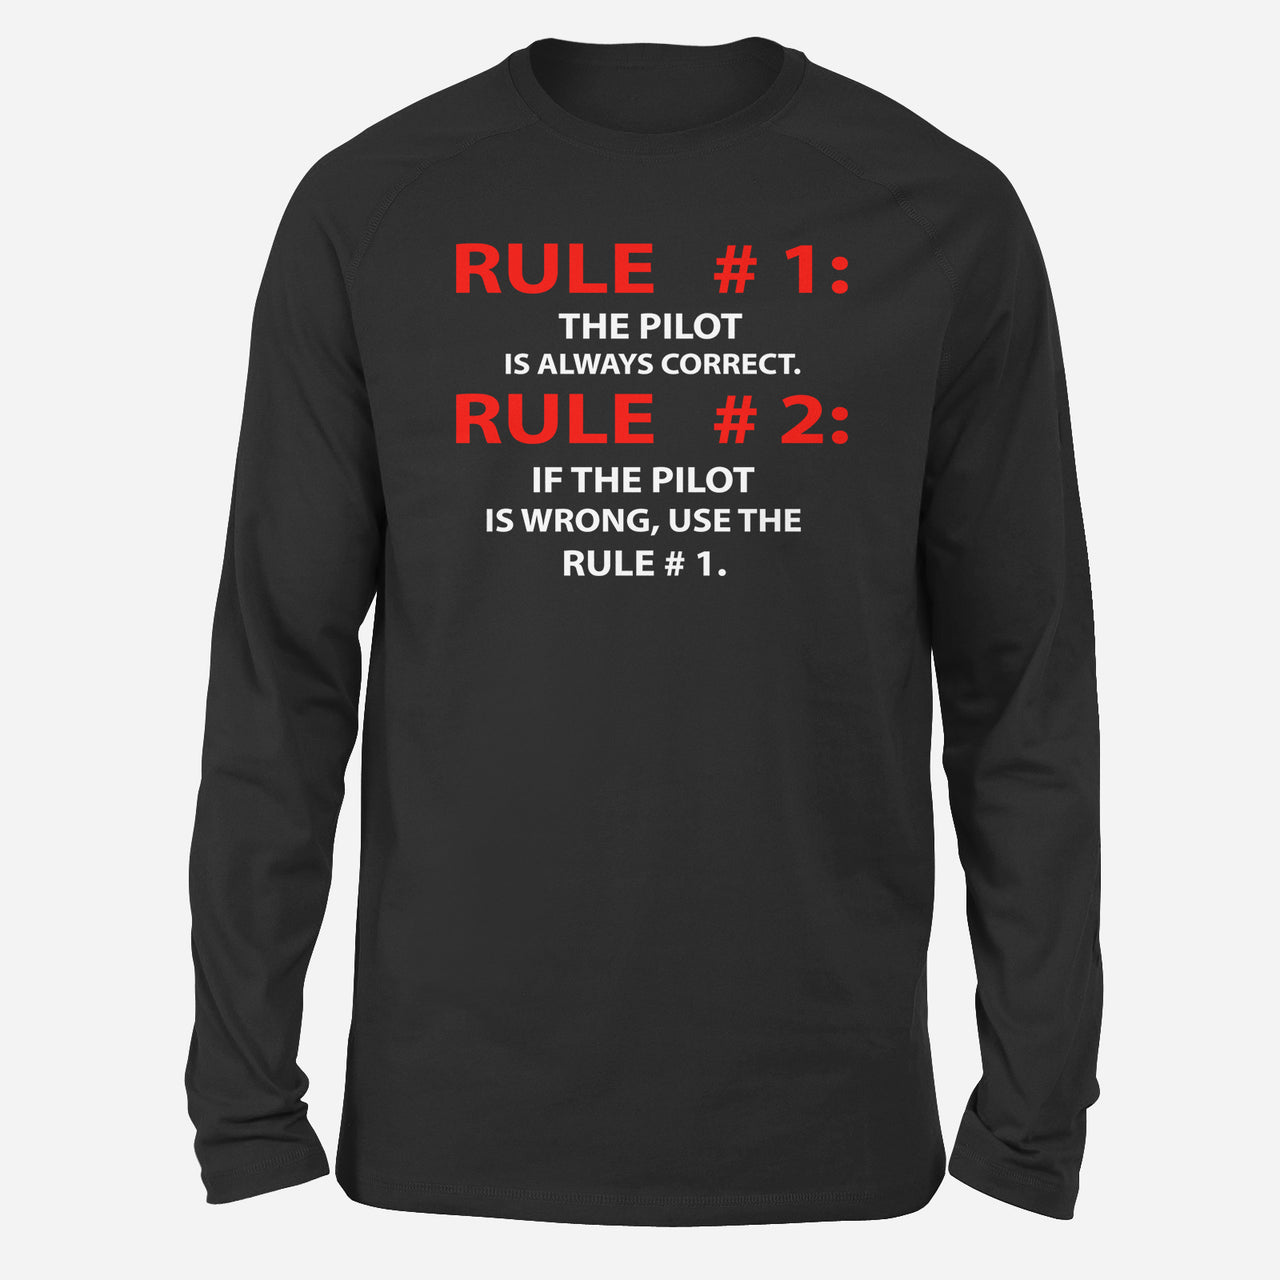 Rule 1 - Pilot is Always Correct Designed Long-Sleeve T-Shirts